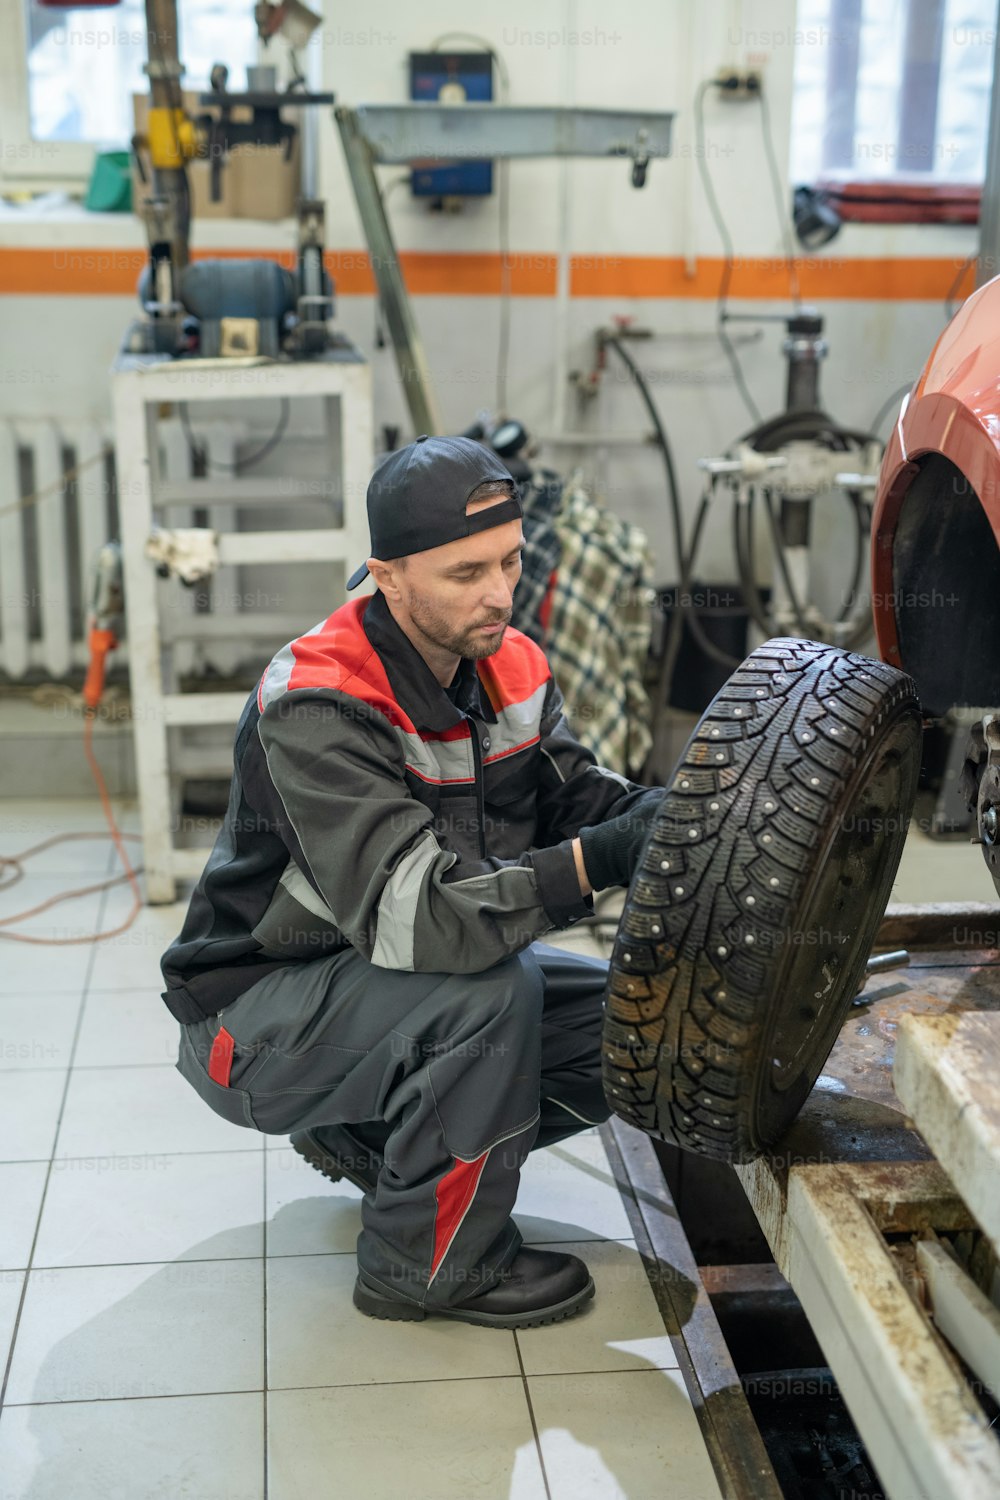 Vertical full length portrait of male mechanic changing tires on car while working in auto repair shop